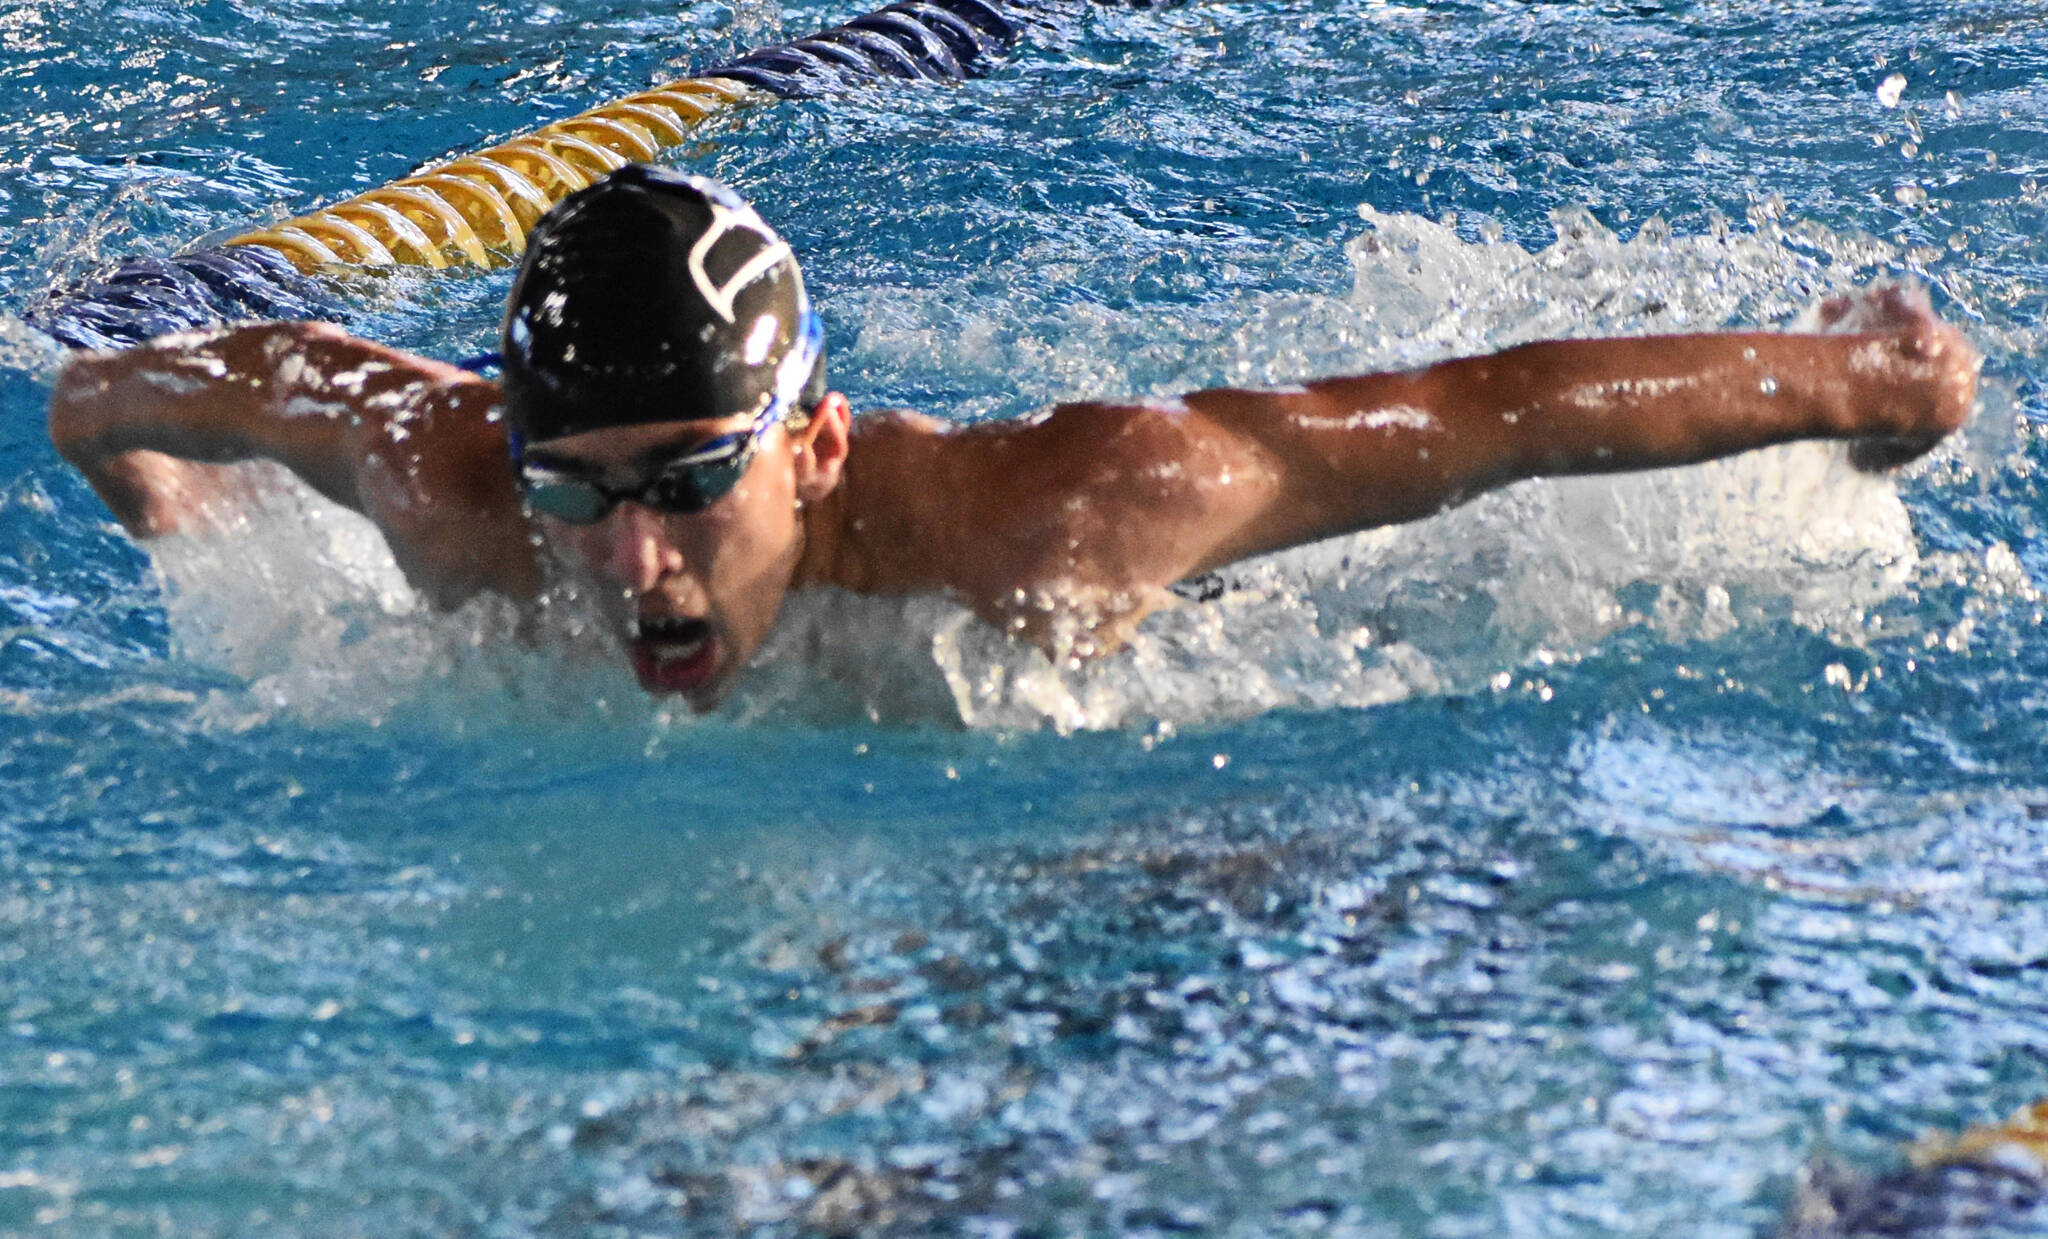 Quinn Rodgers finished fourth in the 50-yard freestyle and 100-yard butterfly.